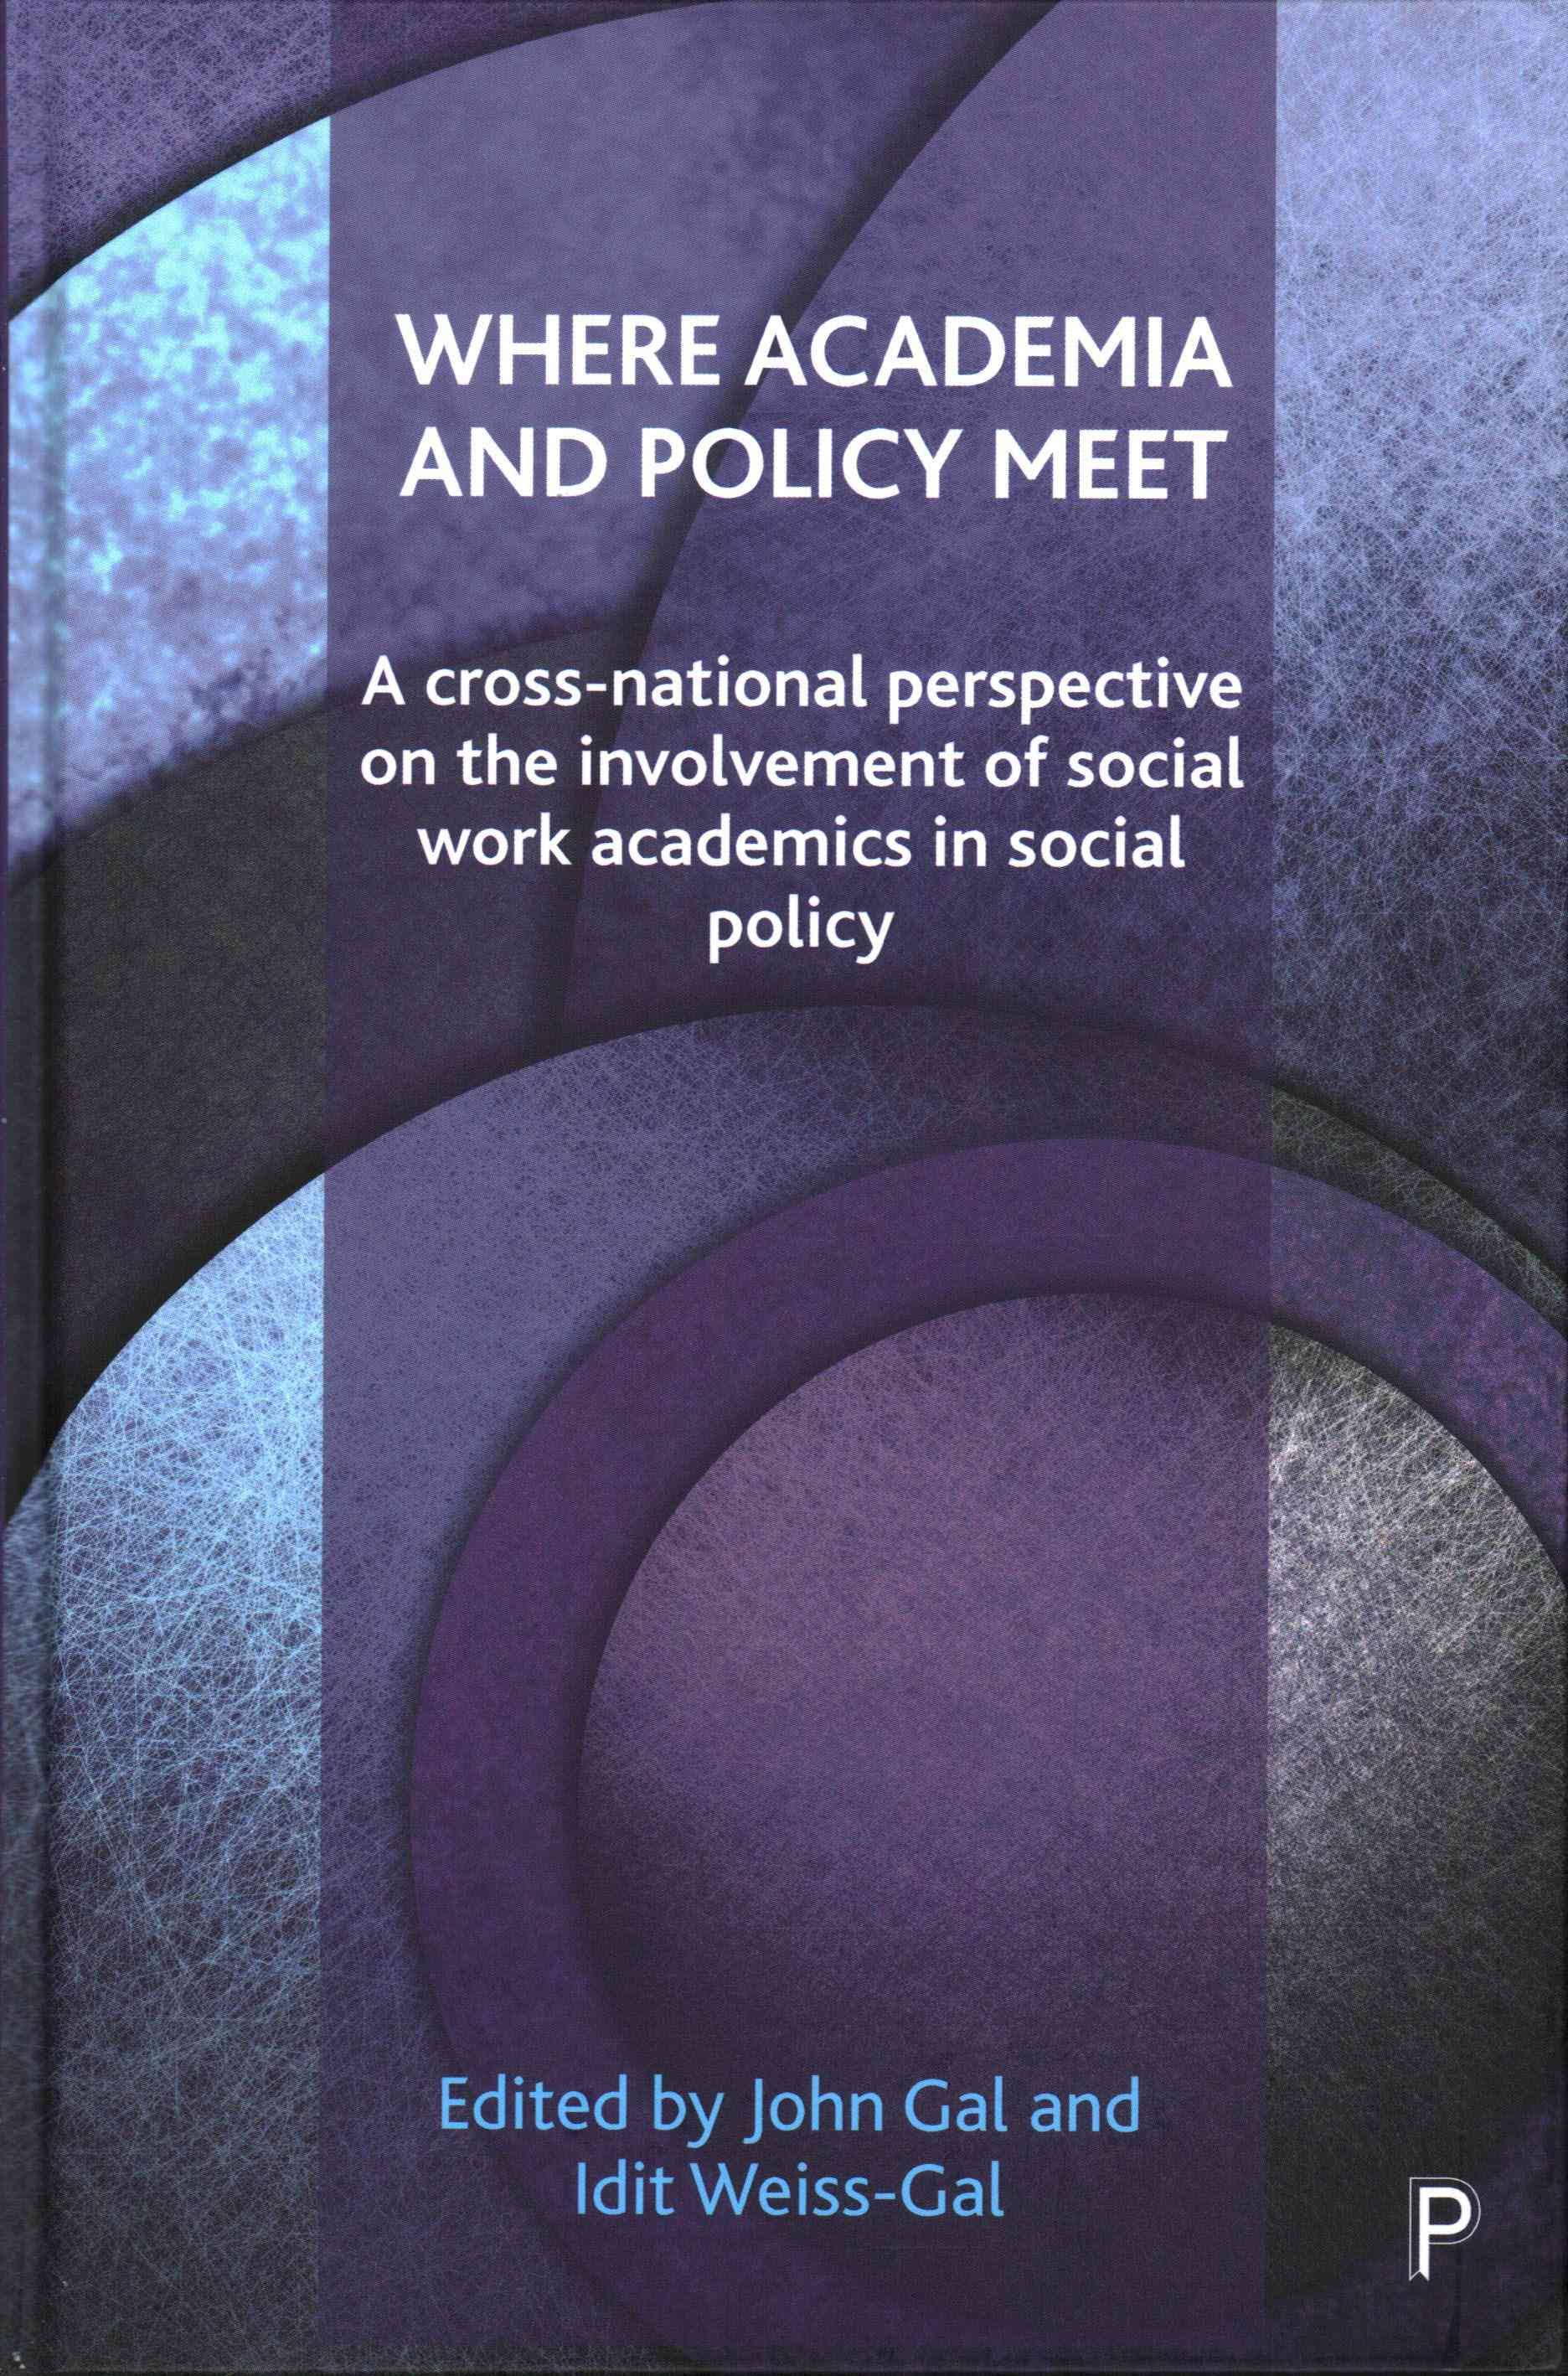 Where academia and policy meet : a cross-national perspective on the involvement of social work academics in social policy 책표지